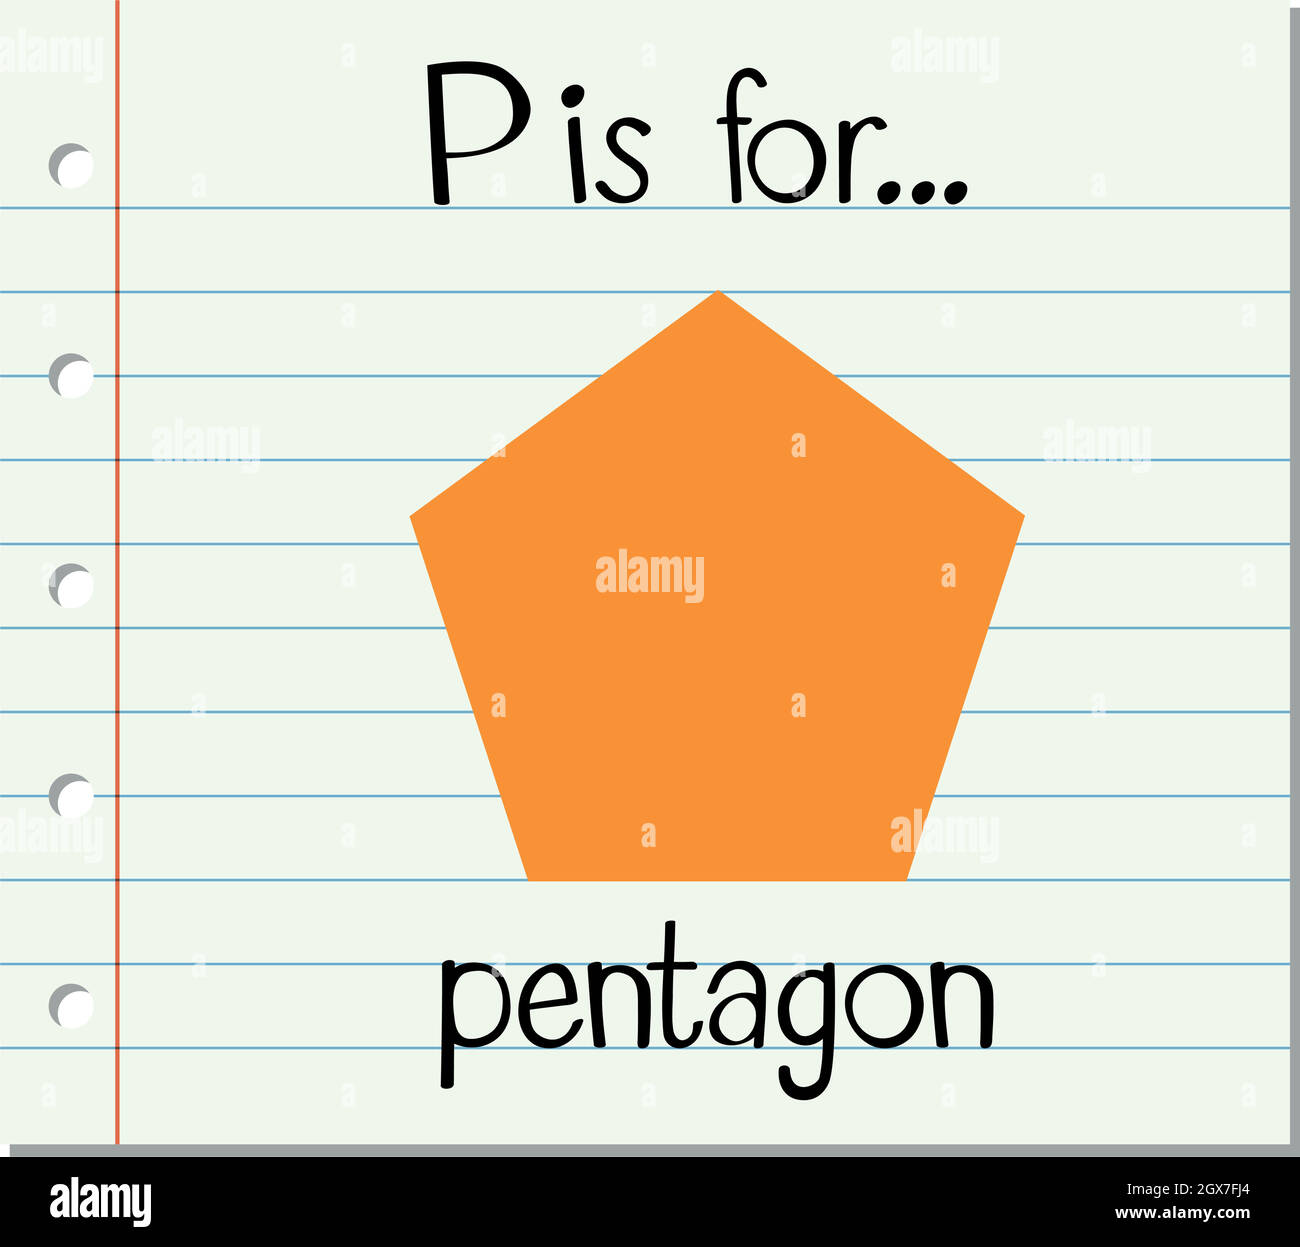 Flashcard letter P is for pentagon Stock Vector